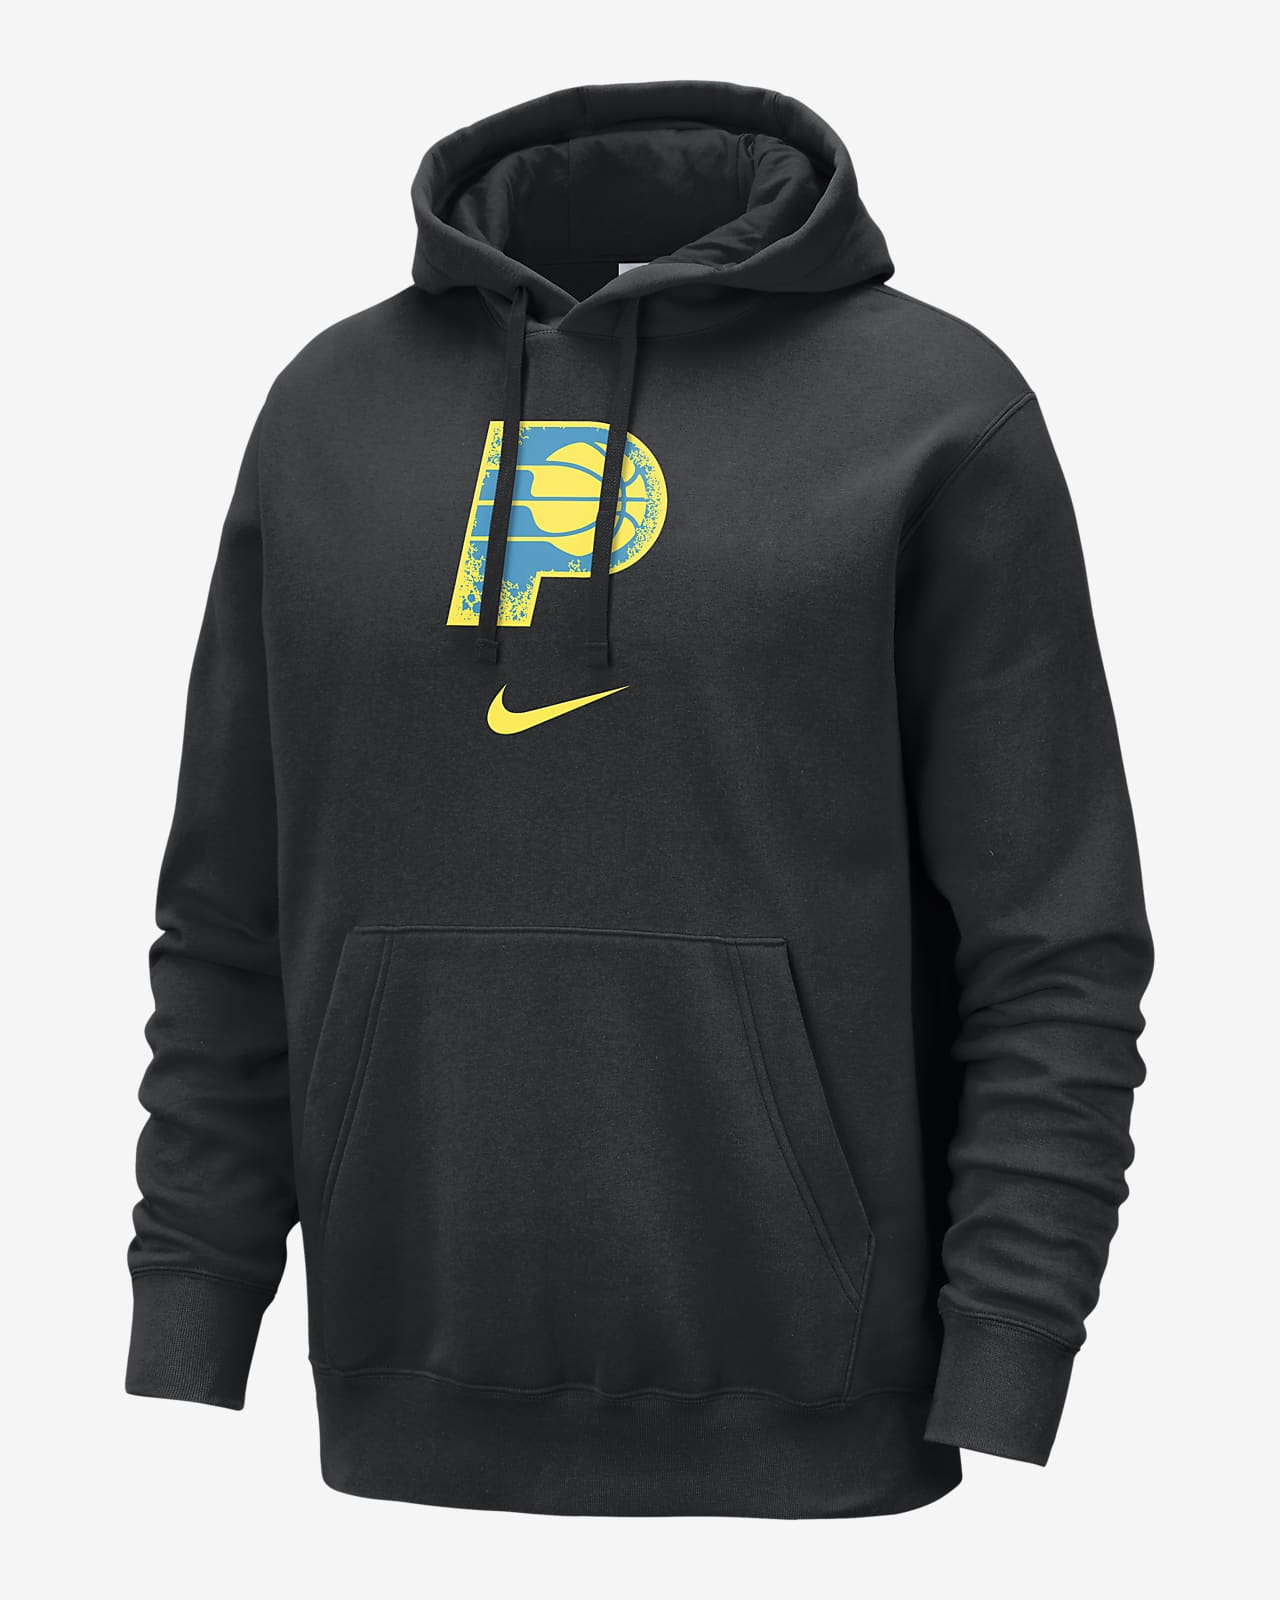 Indiana Pacers Club Fleece City Edition Men's Nike NBA Pullover Hoodie